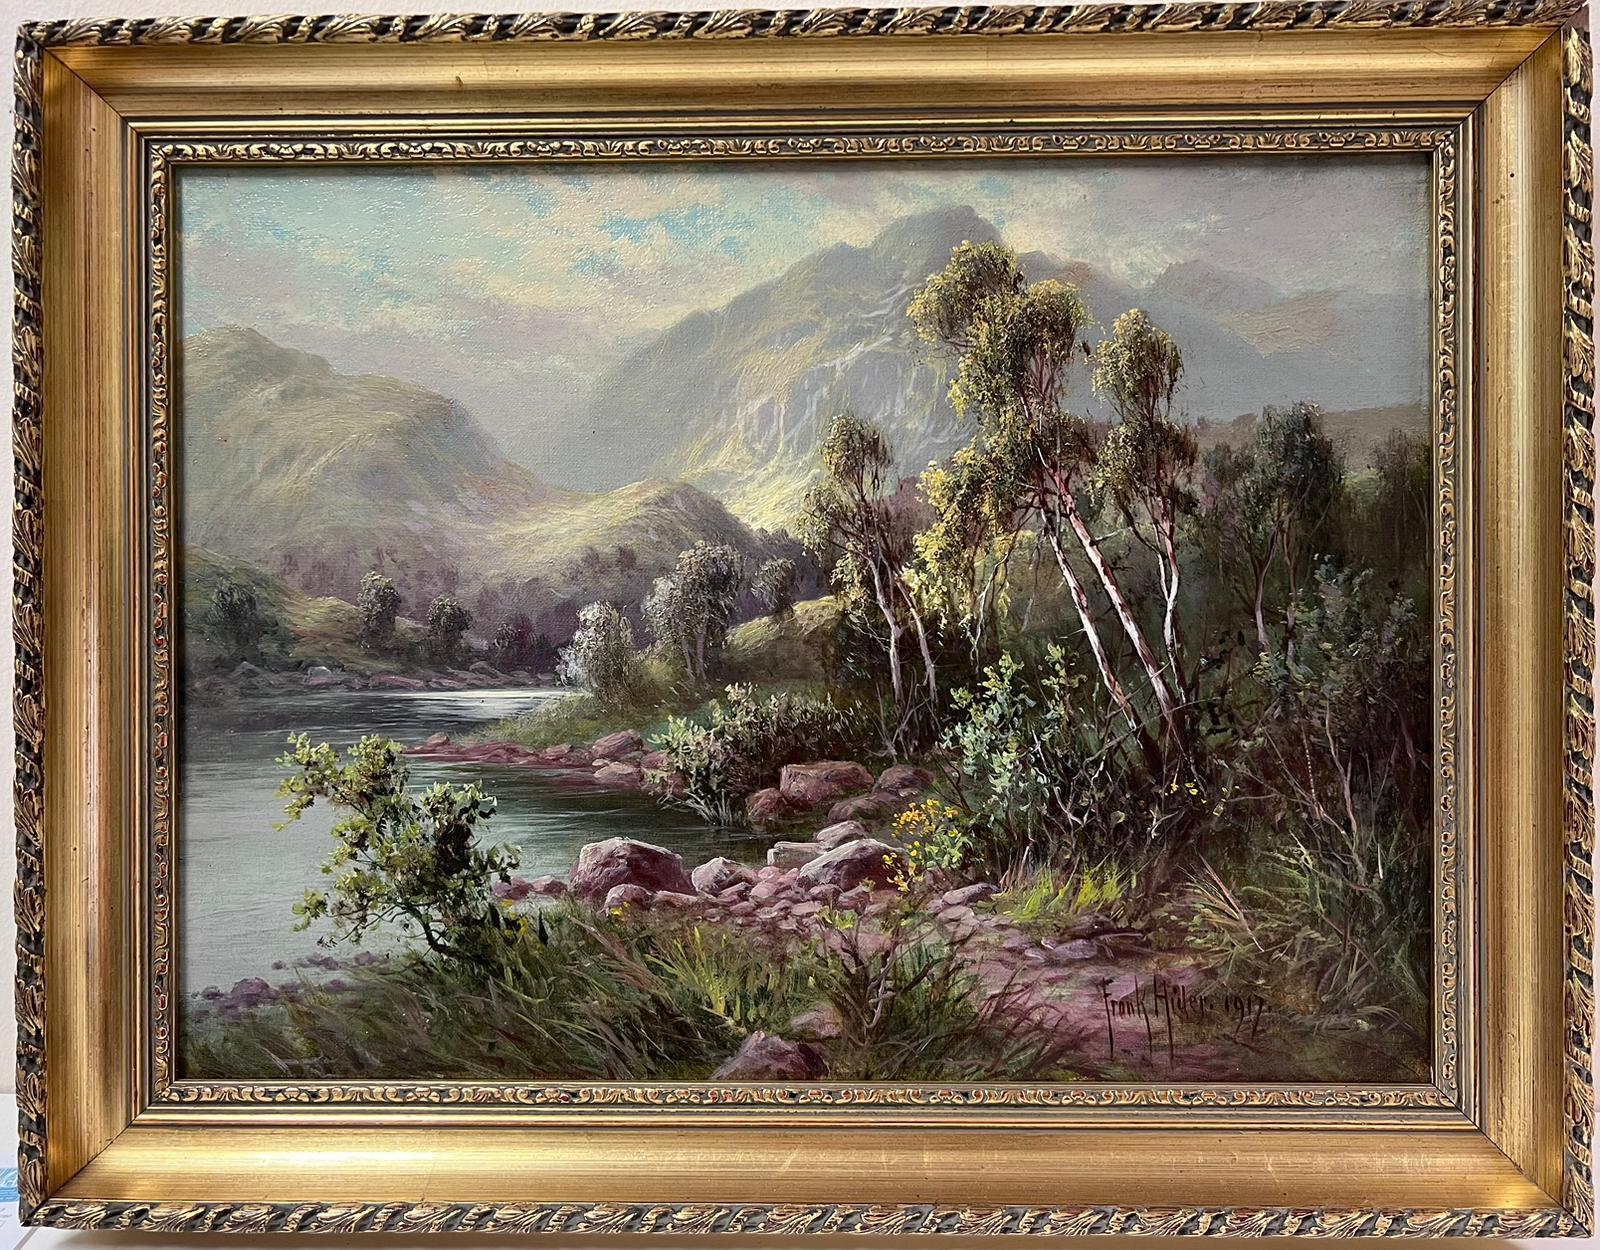 Summer in the Scottish Highlands
signed and dated 1917
by Frank Hider ( British 1861 - 1933).
oil on canvas, framed
framed: 15 x 19 inches
board: 12 x 16 inches
provenance: private collection
condition: very good and sound condition  